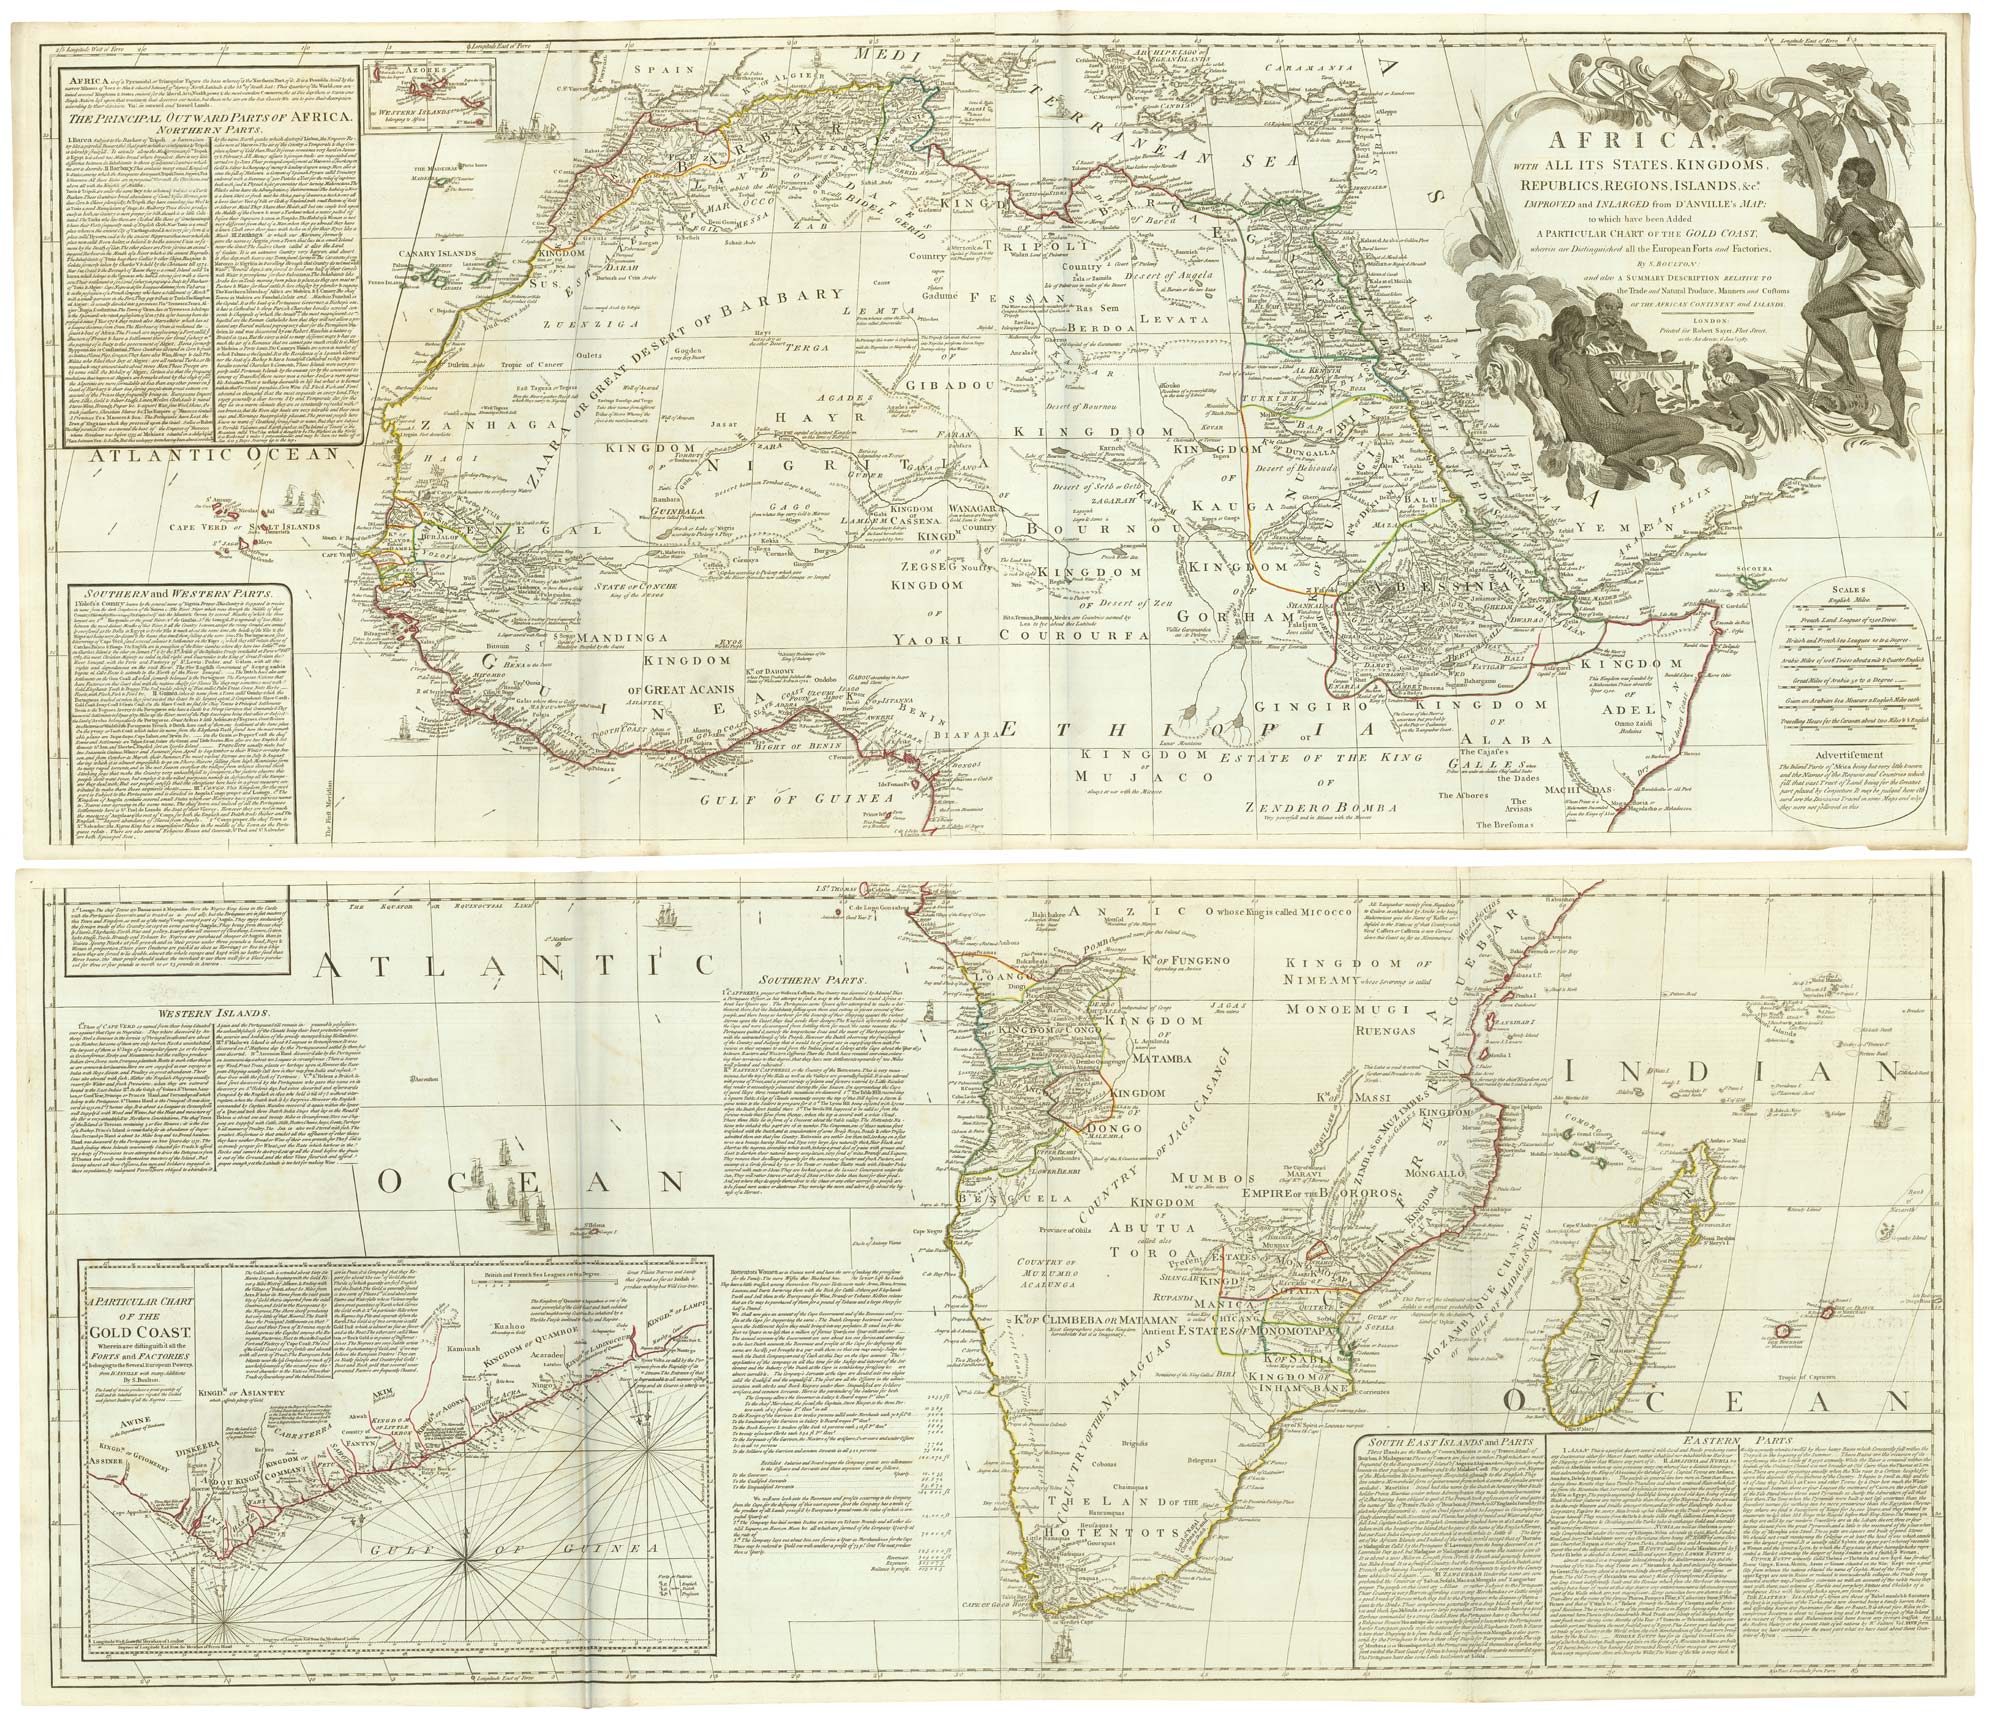 Africa With All its States, Kingdoms, Republics, Regions, Islands, &c.a Improved and Inlarged from D'Anville's Map; to which have been Added A Particular Chart of the Gold COast, wherein are Distinguished all the European Forts and Factories